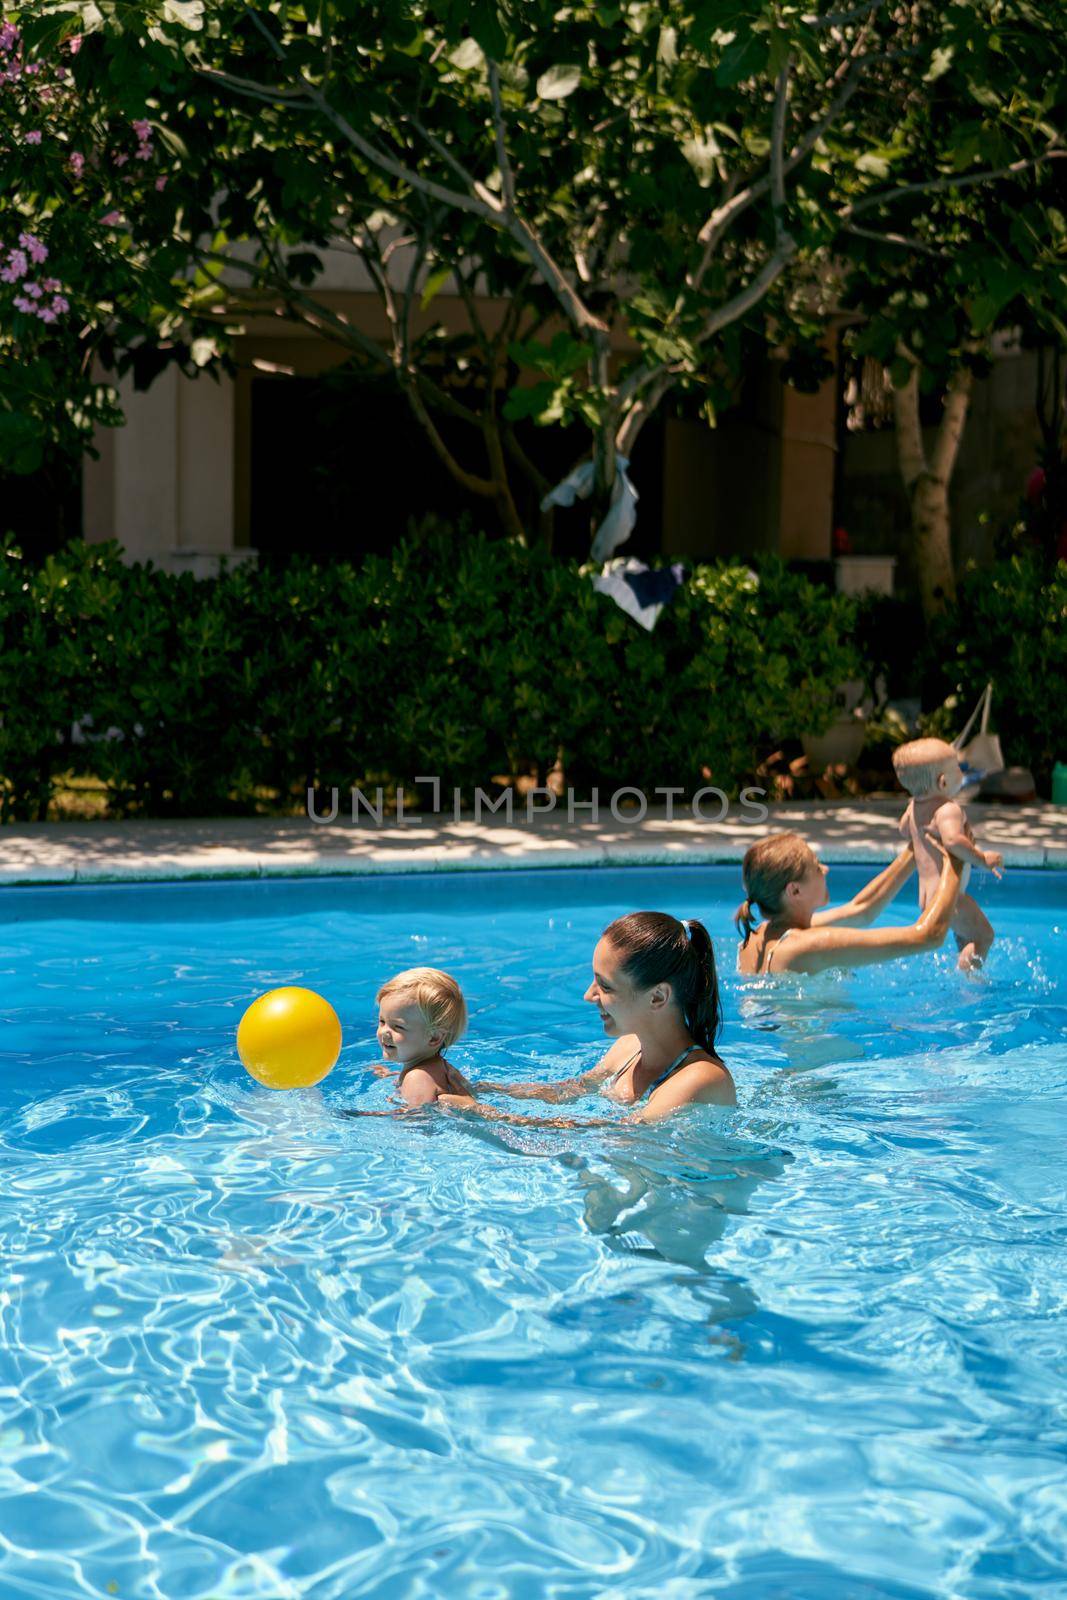 Moms with small children play with a ball in the pool by Nadtochiy